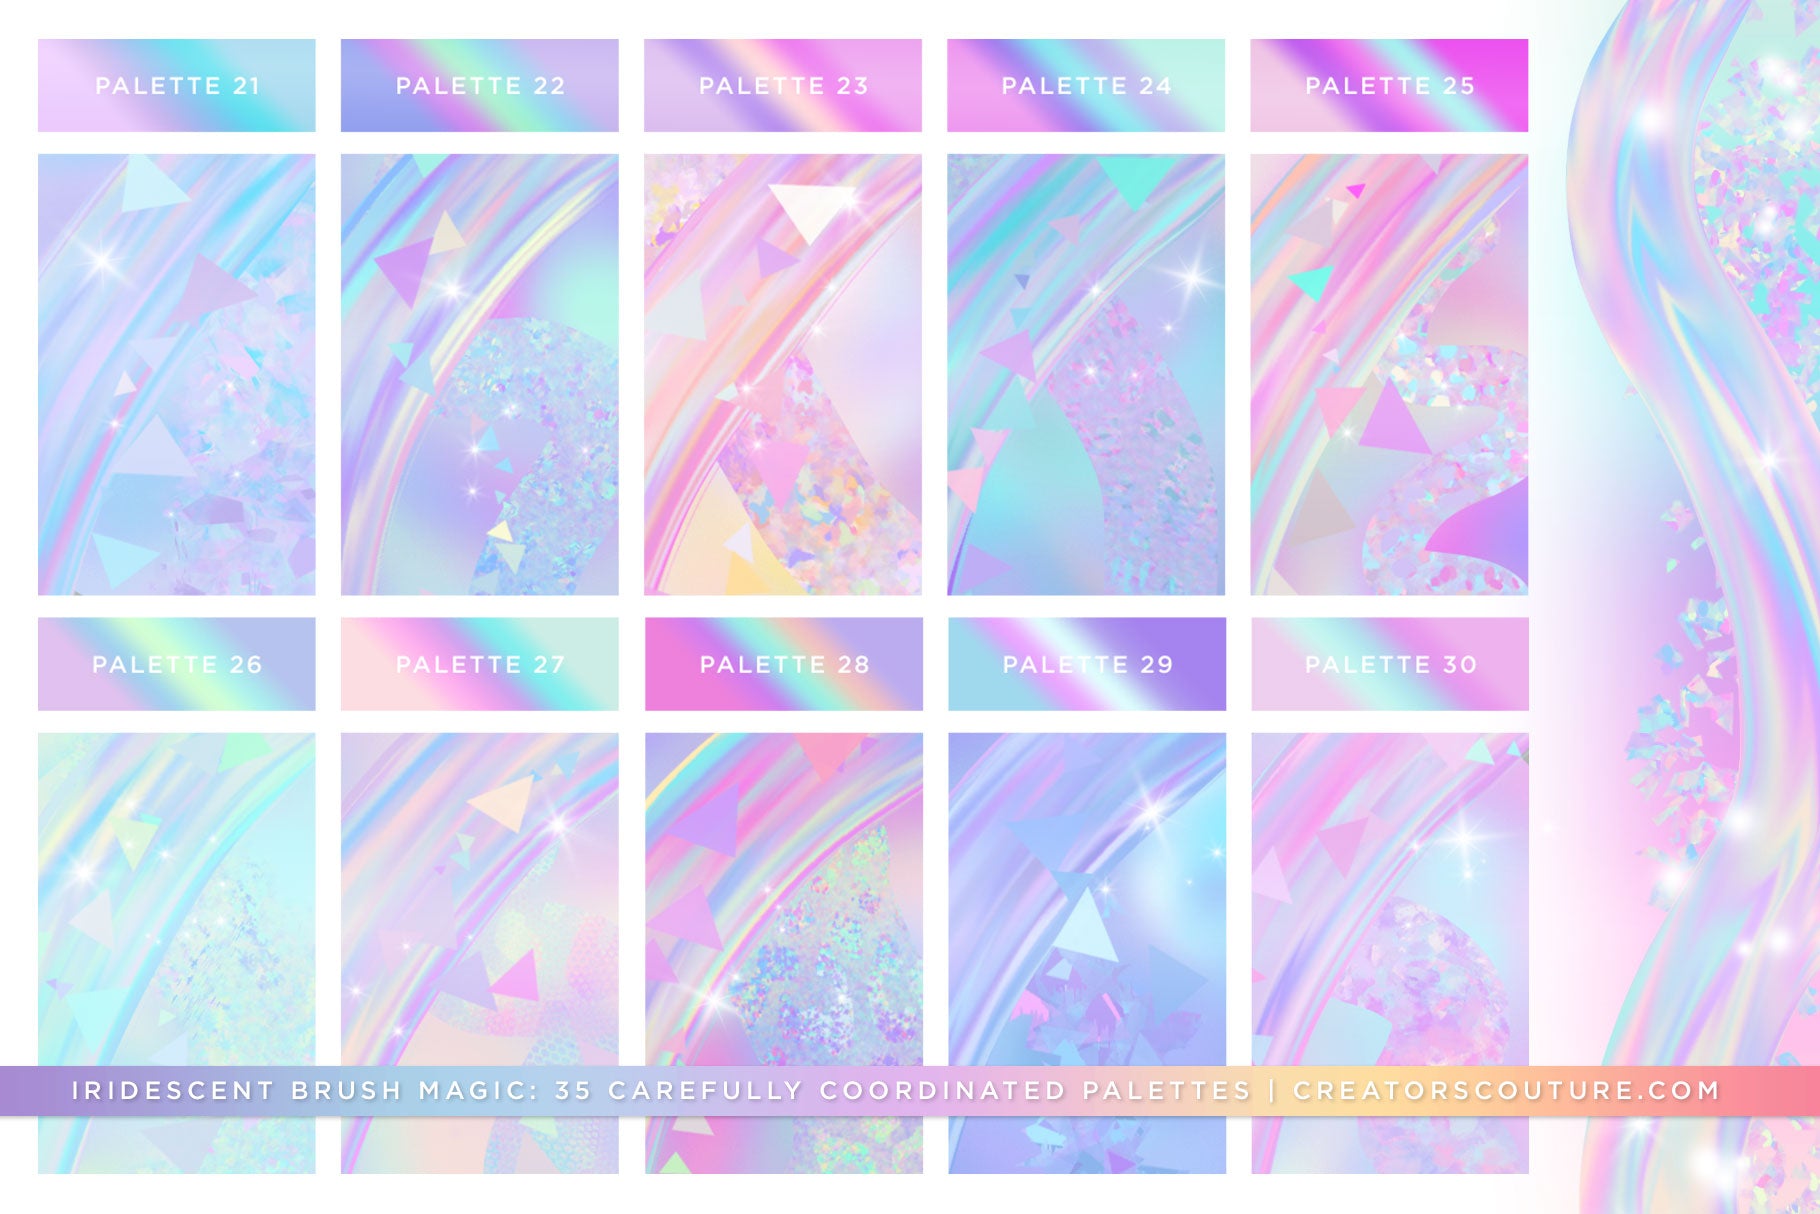 photoshop brushes for instant iridescent and holographic effects and brush strokes, iridescent palette preview chart 3